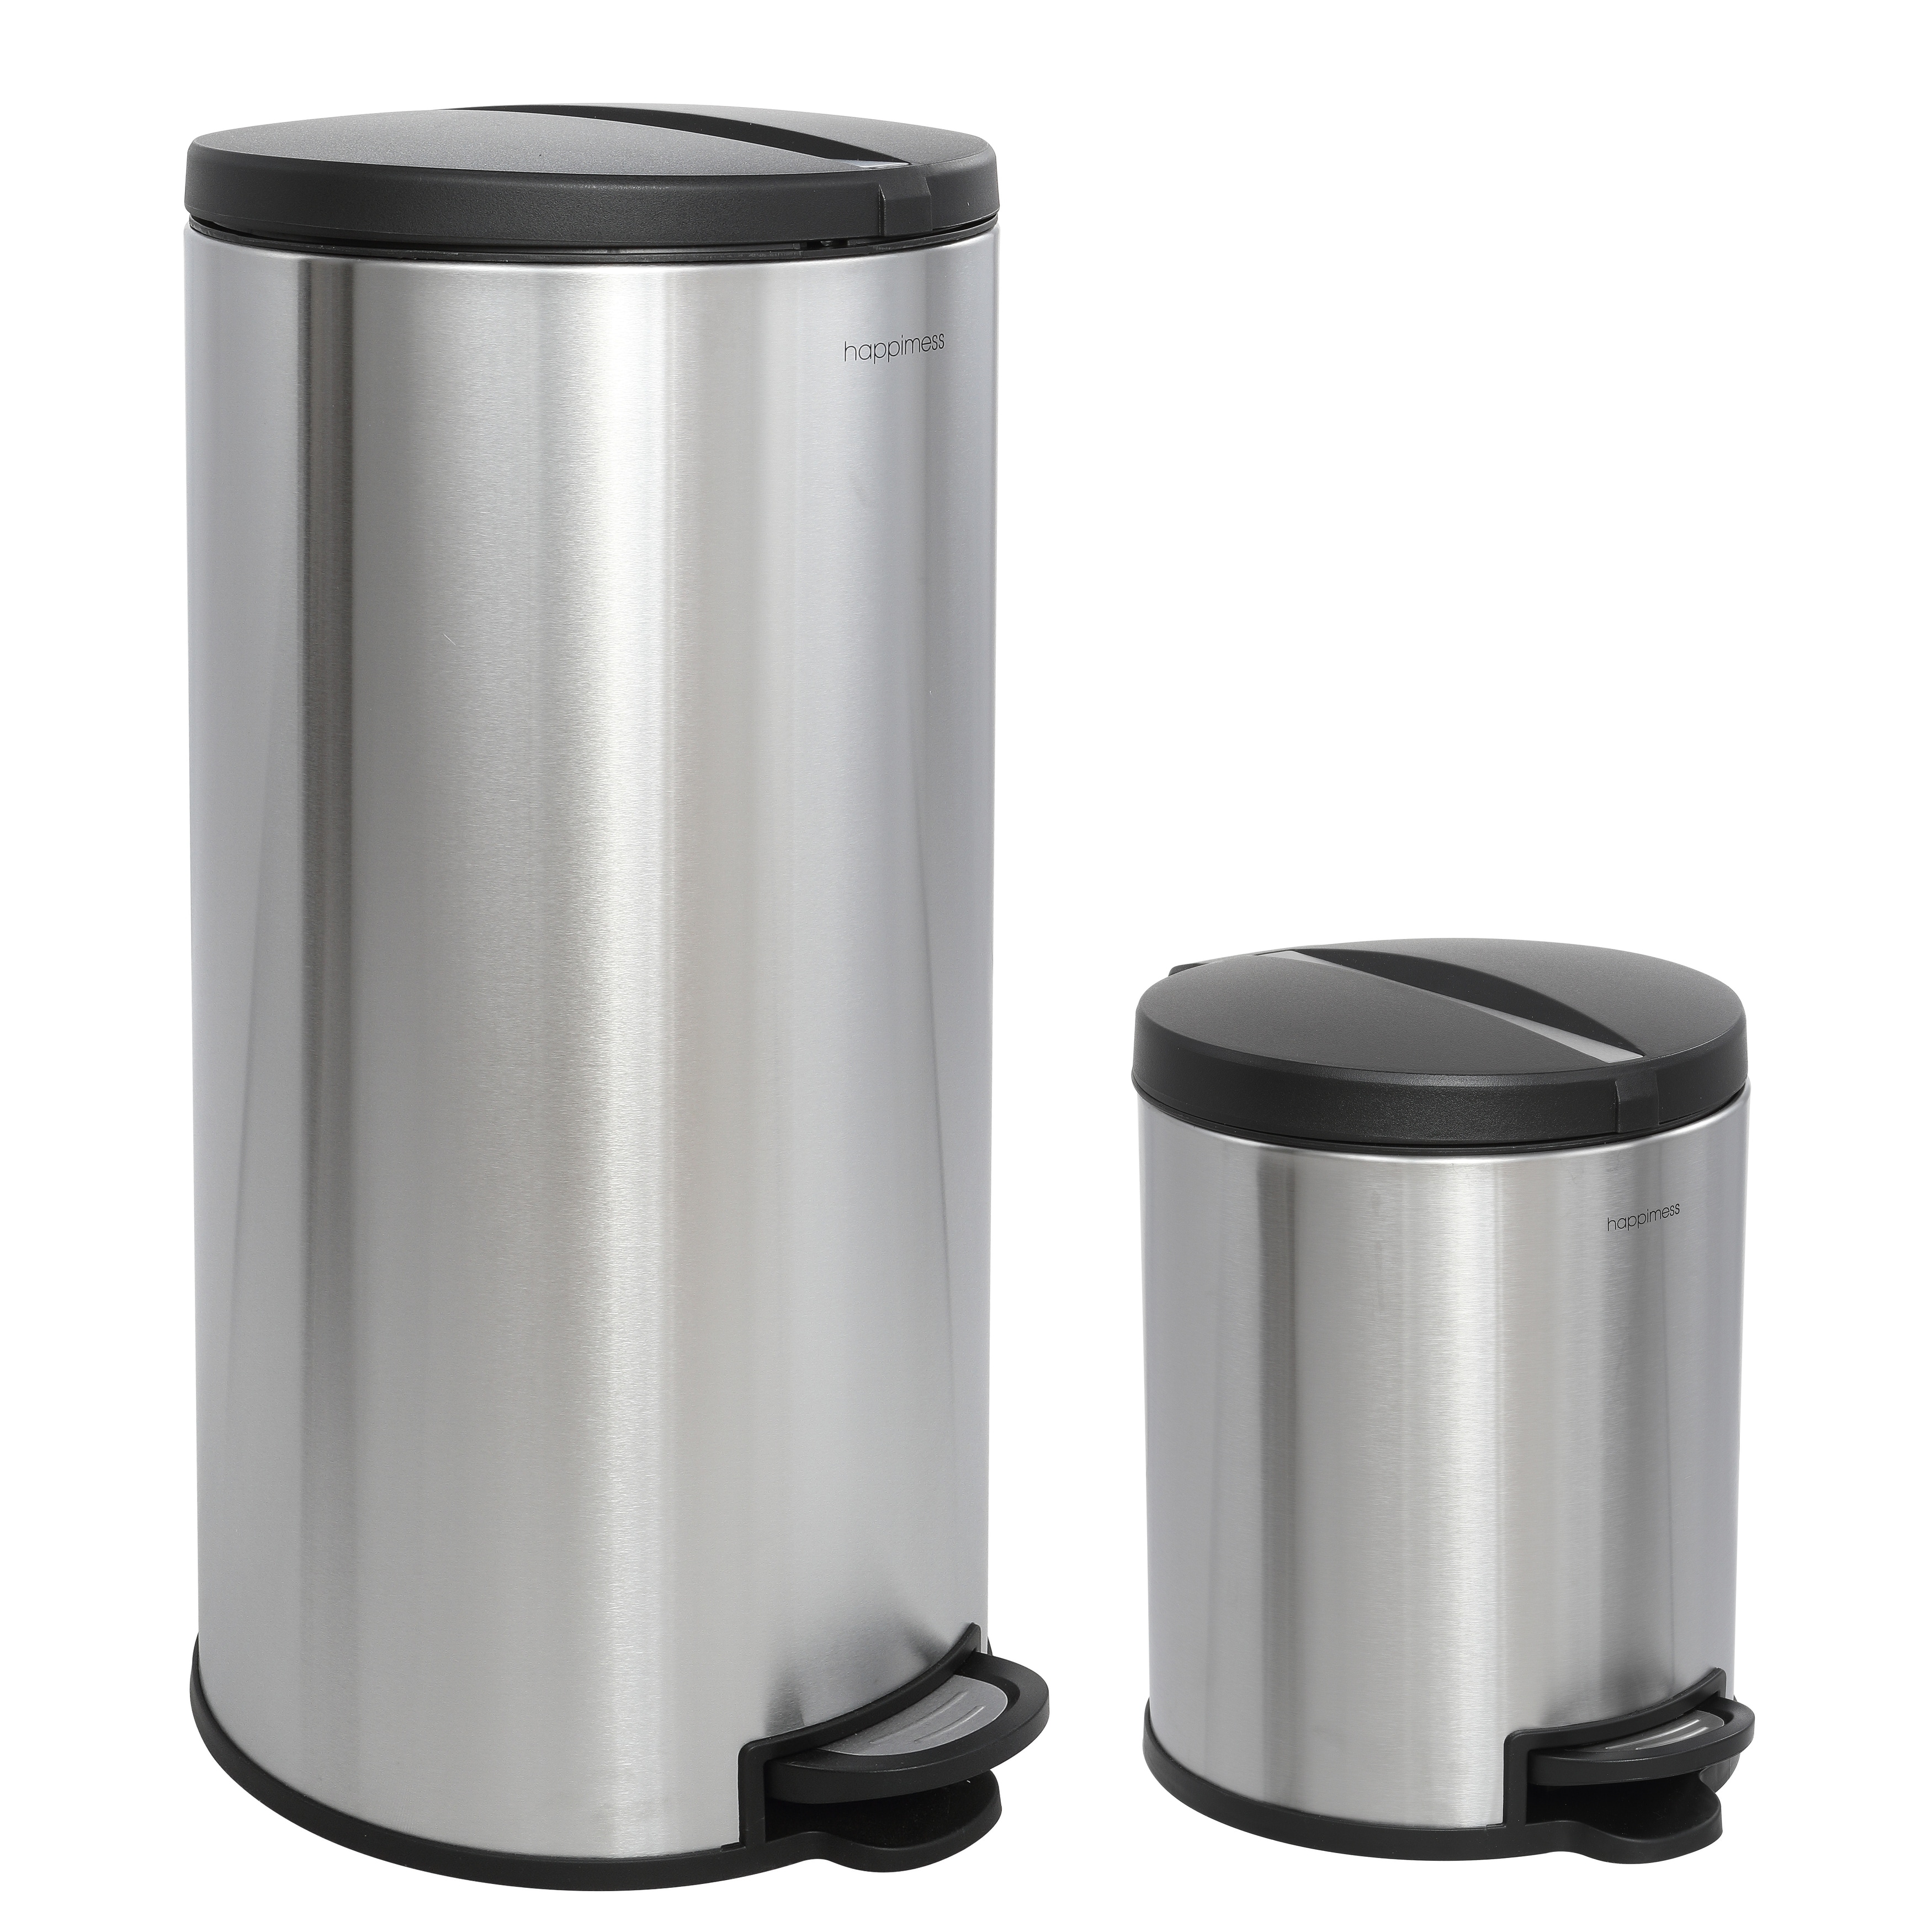 https://ak1.ostkcdn.com/images/products/is/images/direct/a9d6df8fd6abc2de190e13b735615c162d35fbf0/happimess-Oscar-Round-8-Gallon-Step-Open-Trash-Can-with-FREE-Mini-Trash-Can%2C-Stainless-Steel-Black.jpg